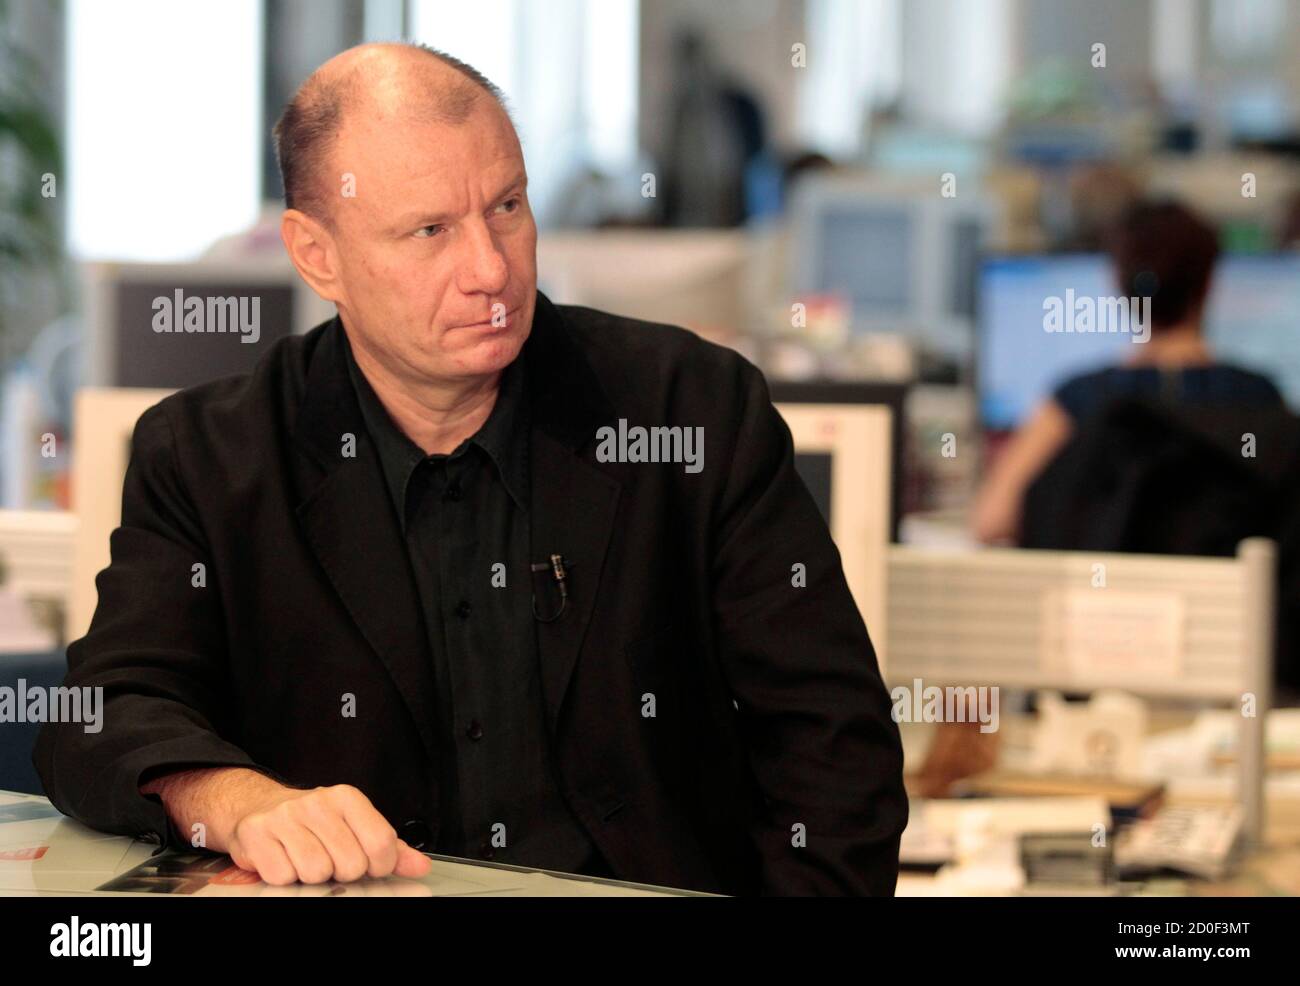 Vladimir Potanin, Founder and Owner of Interros, speaks with journalists at Reuters office in Moscow, September 15, 2010. Leading Russian business chiefs, bankers and officials will discuss the outlook for investment in Russia and progress on its modernisation at the fourth Reuters Russia Investment Summit from Sept. 13-15 in a series of exclusive interviews.  REUTERS/Alexander Natruskin  (RUSSIA) Stock Photo